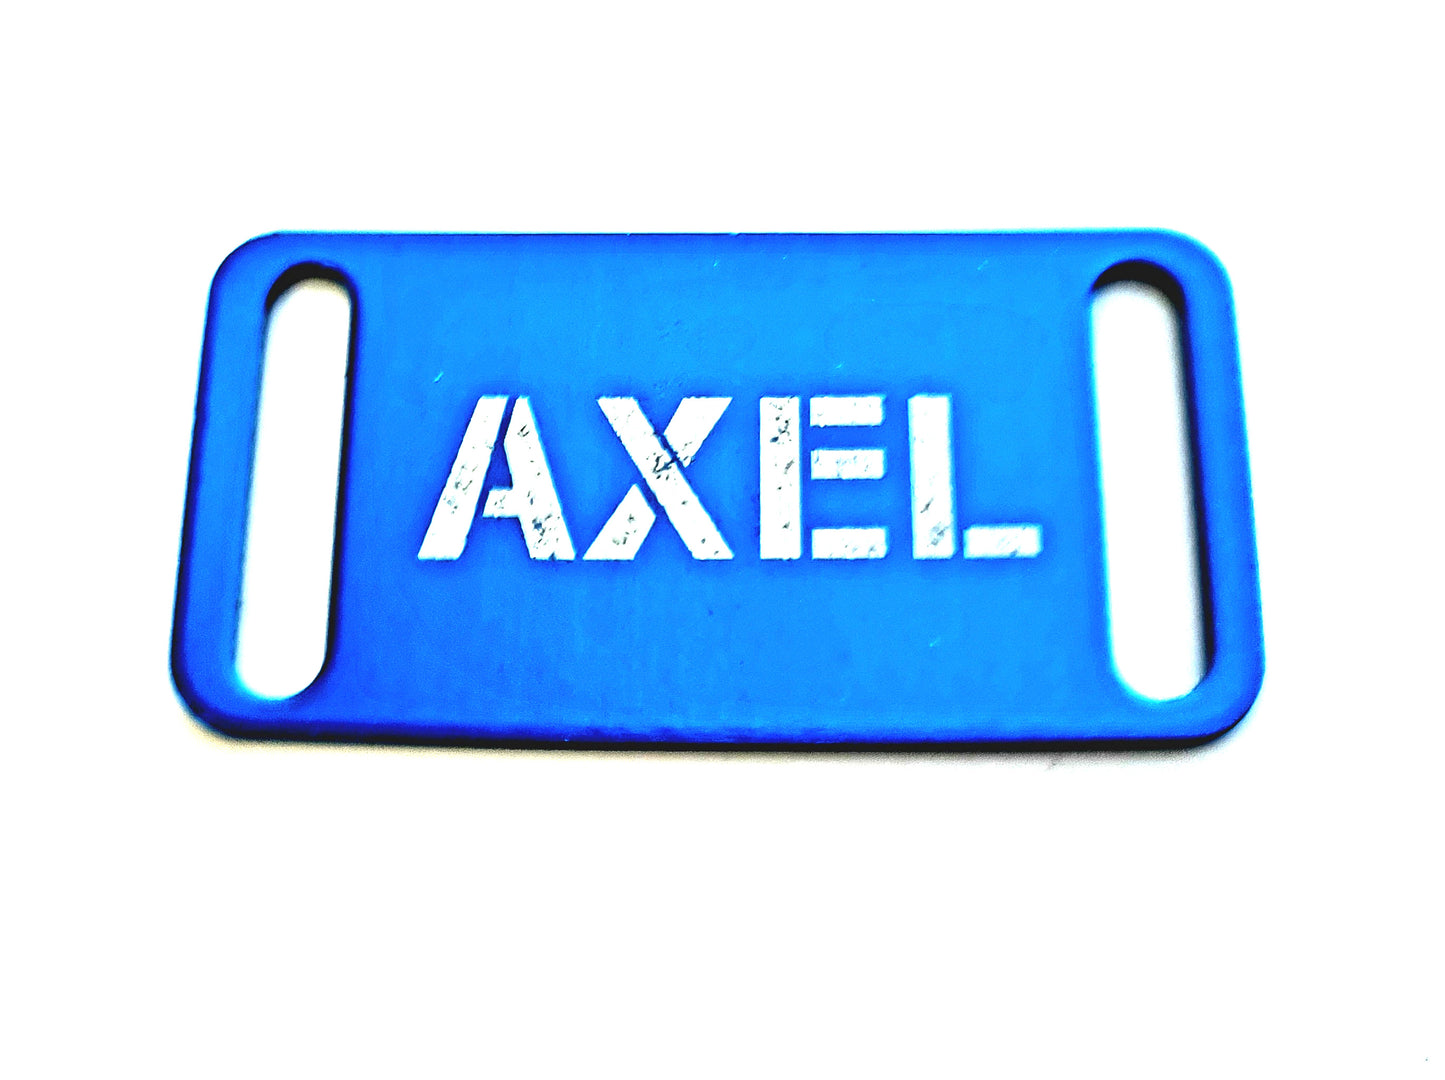 Engraved Anodised Slide On Collar Tag - MEDIUM - to fit 19mm (3/4") wide collars - FOUR Colour Options